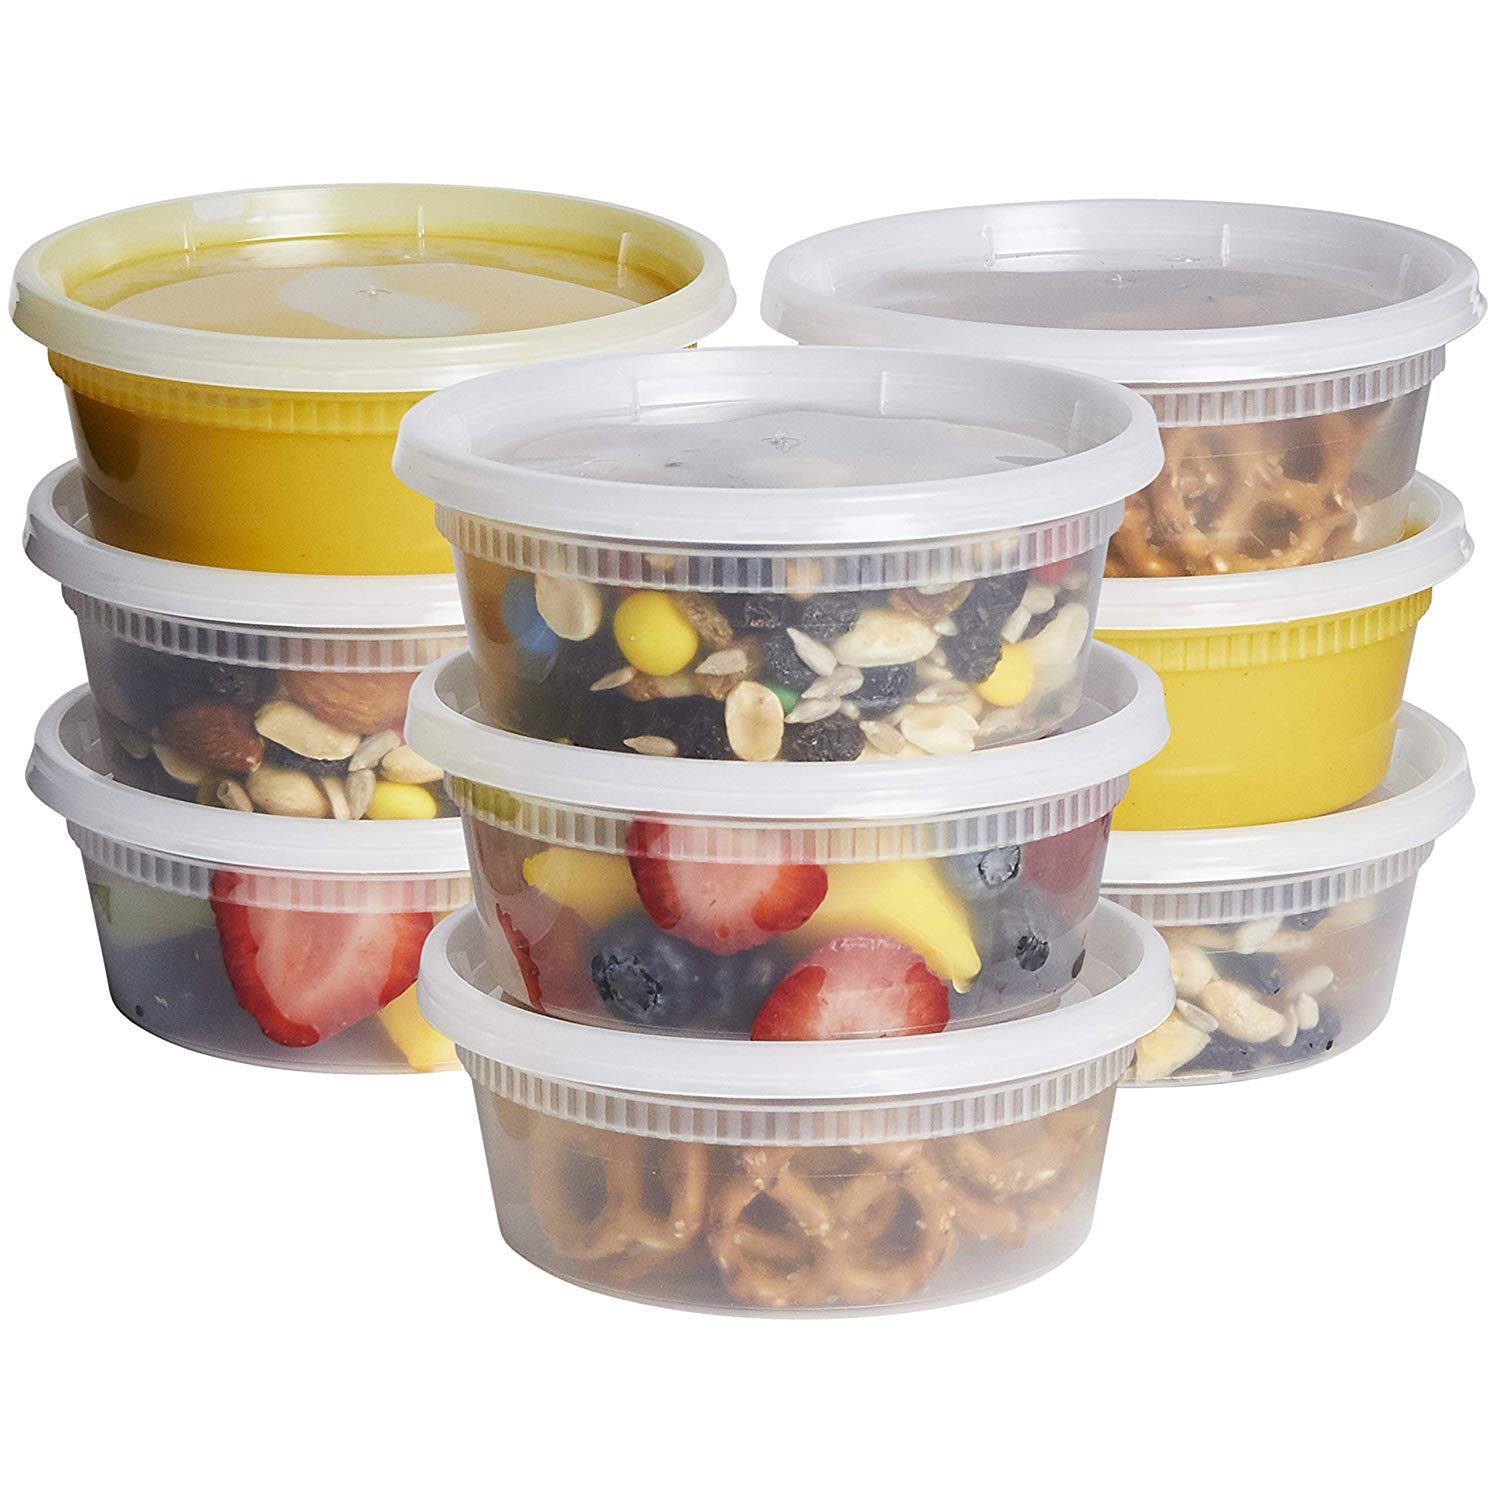 12 x 8 Food Storage Containers and 32 oz Deli Containers with Lids 16 